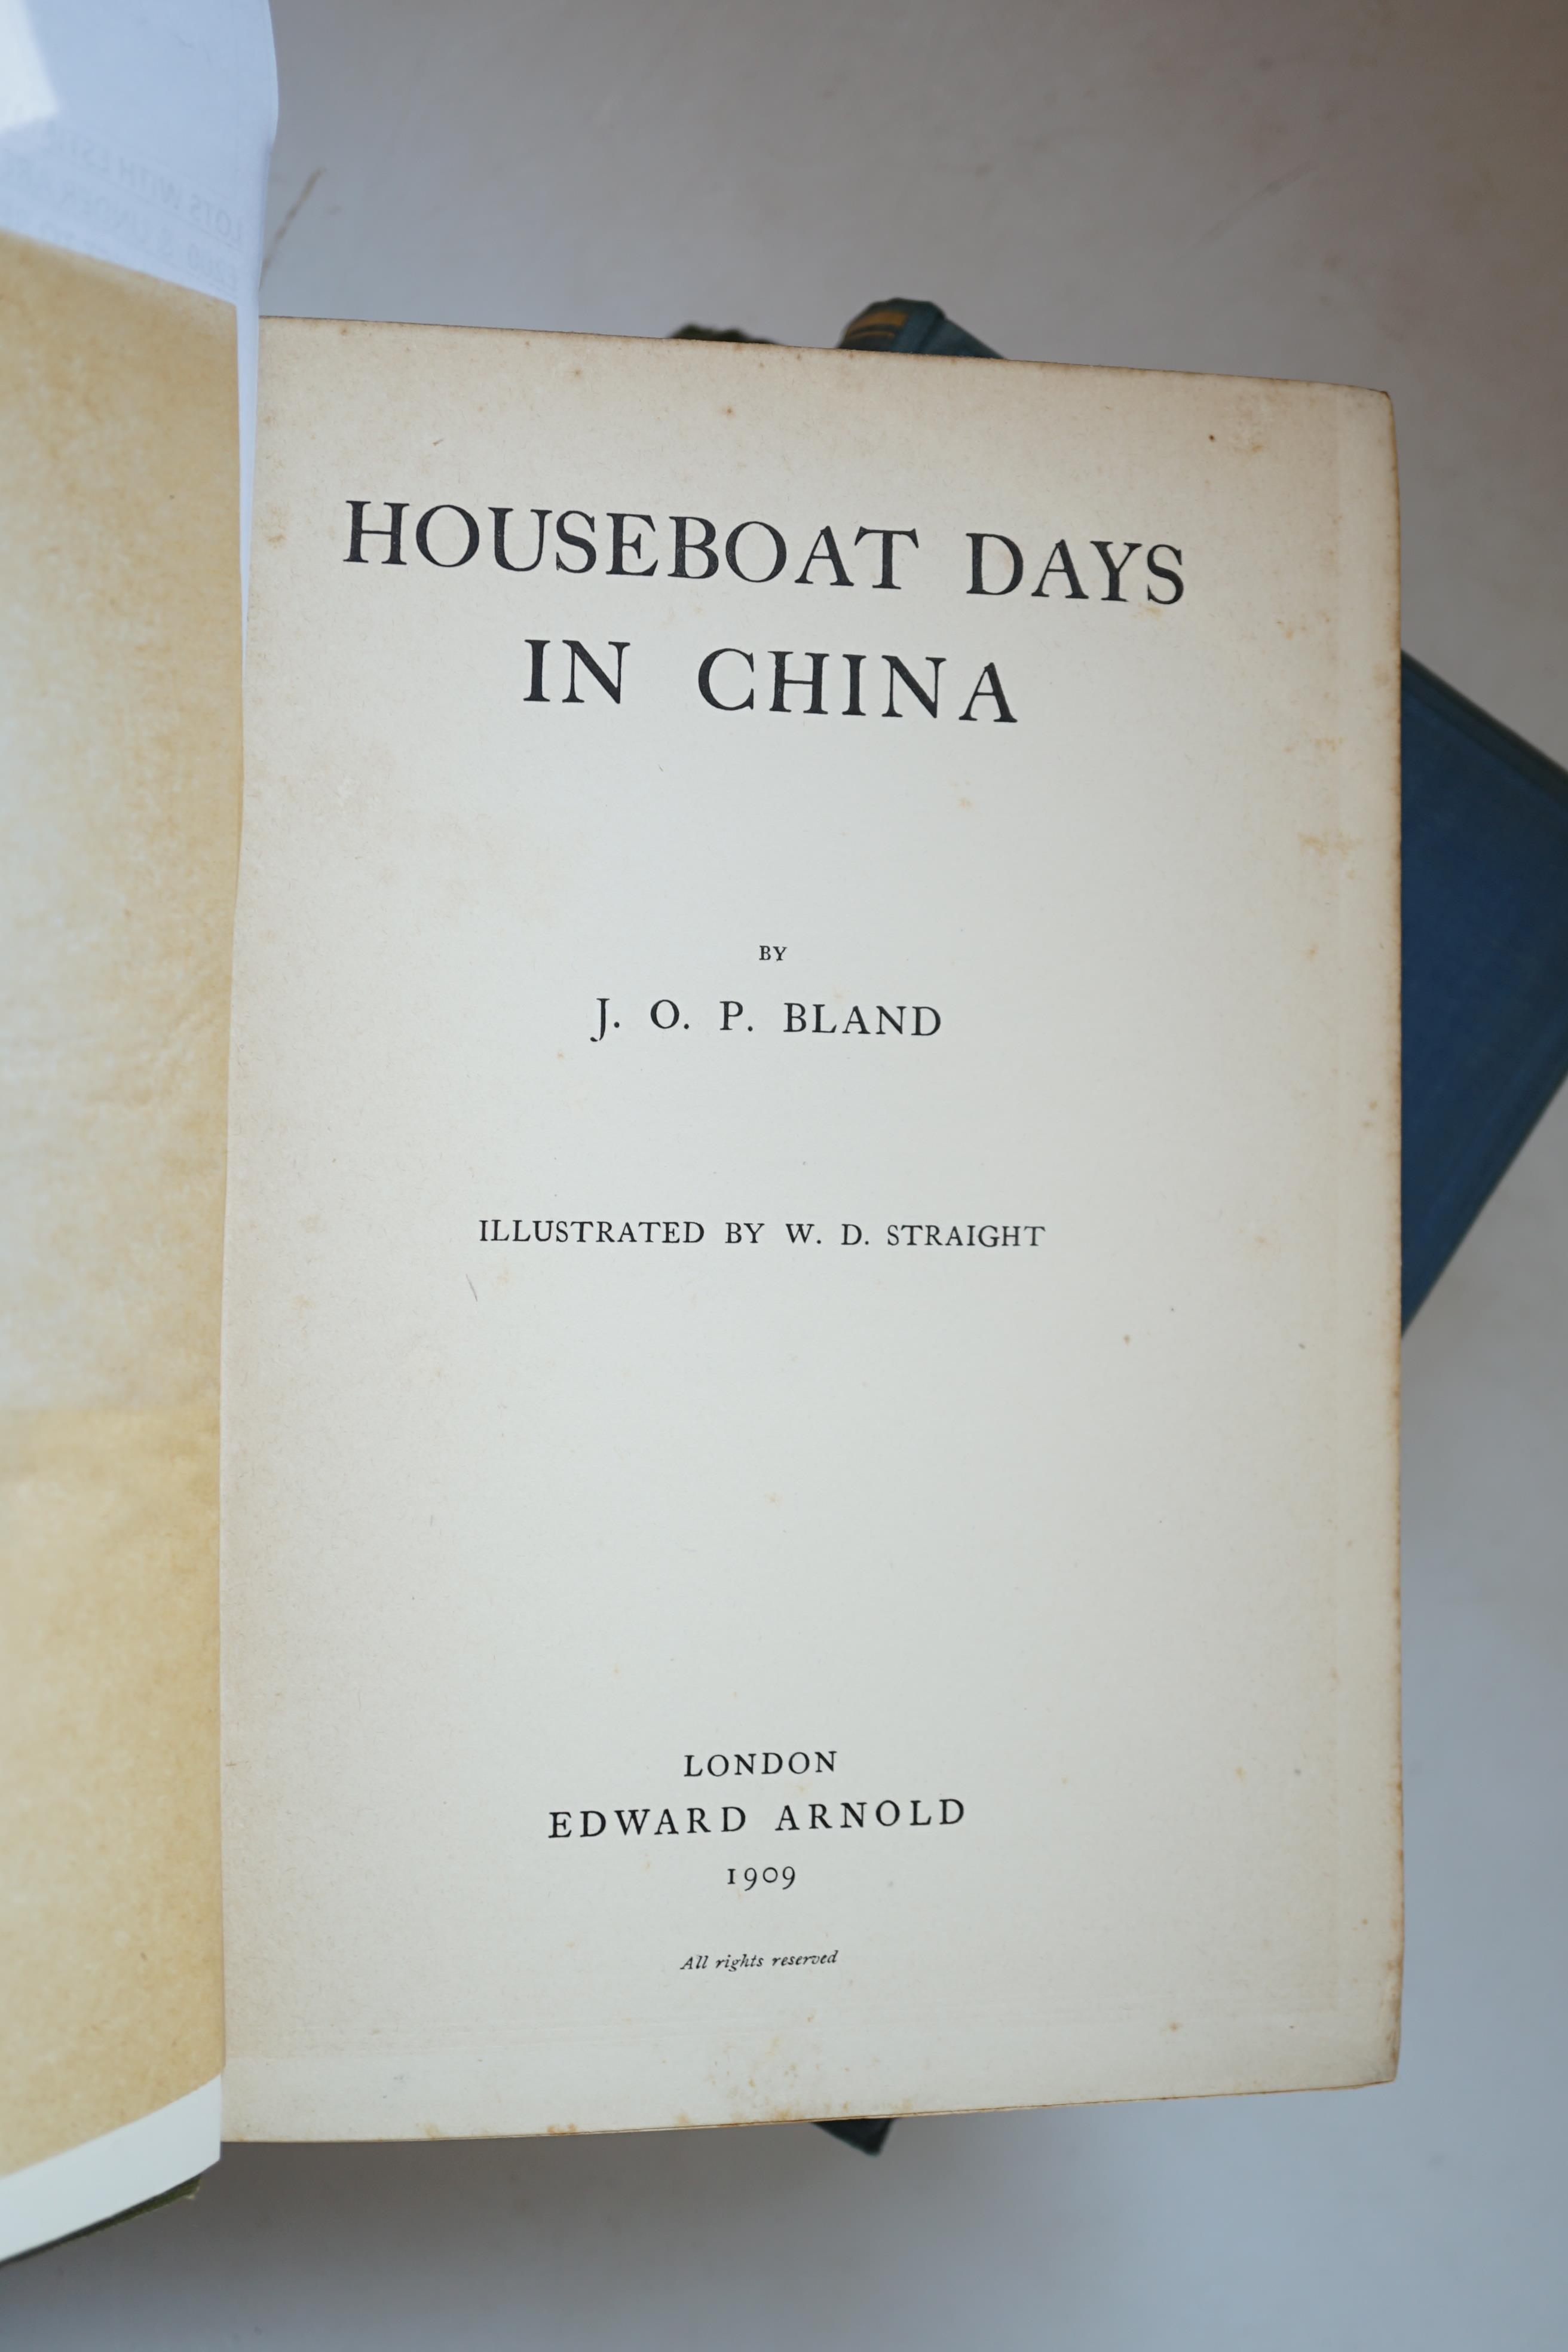 Bland, J.O.P - Houseboat Days in China, 8vo, original cloth gilt, illustrated by W.D. Straight, London, 1909; Wood, H.S - Shikar Memorirs. A Record of Sport and Observation in India and Burma, 8vo, cloth, London, 1934 an